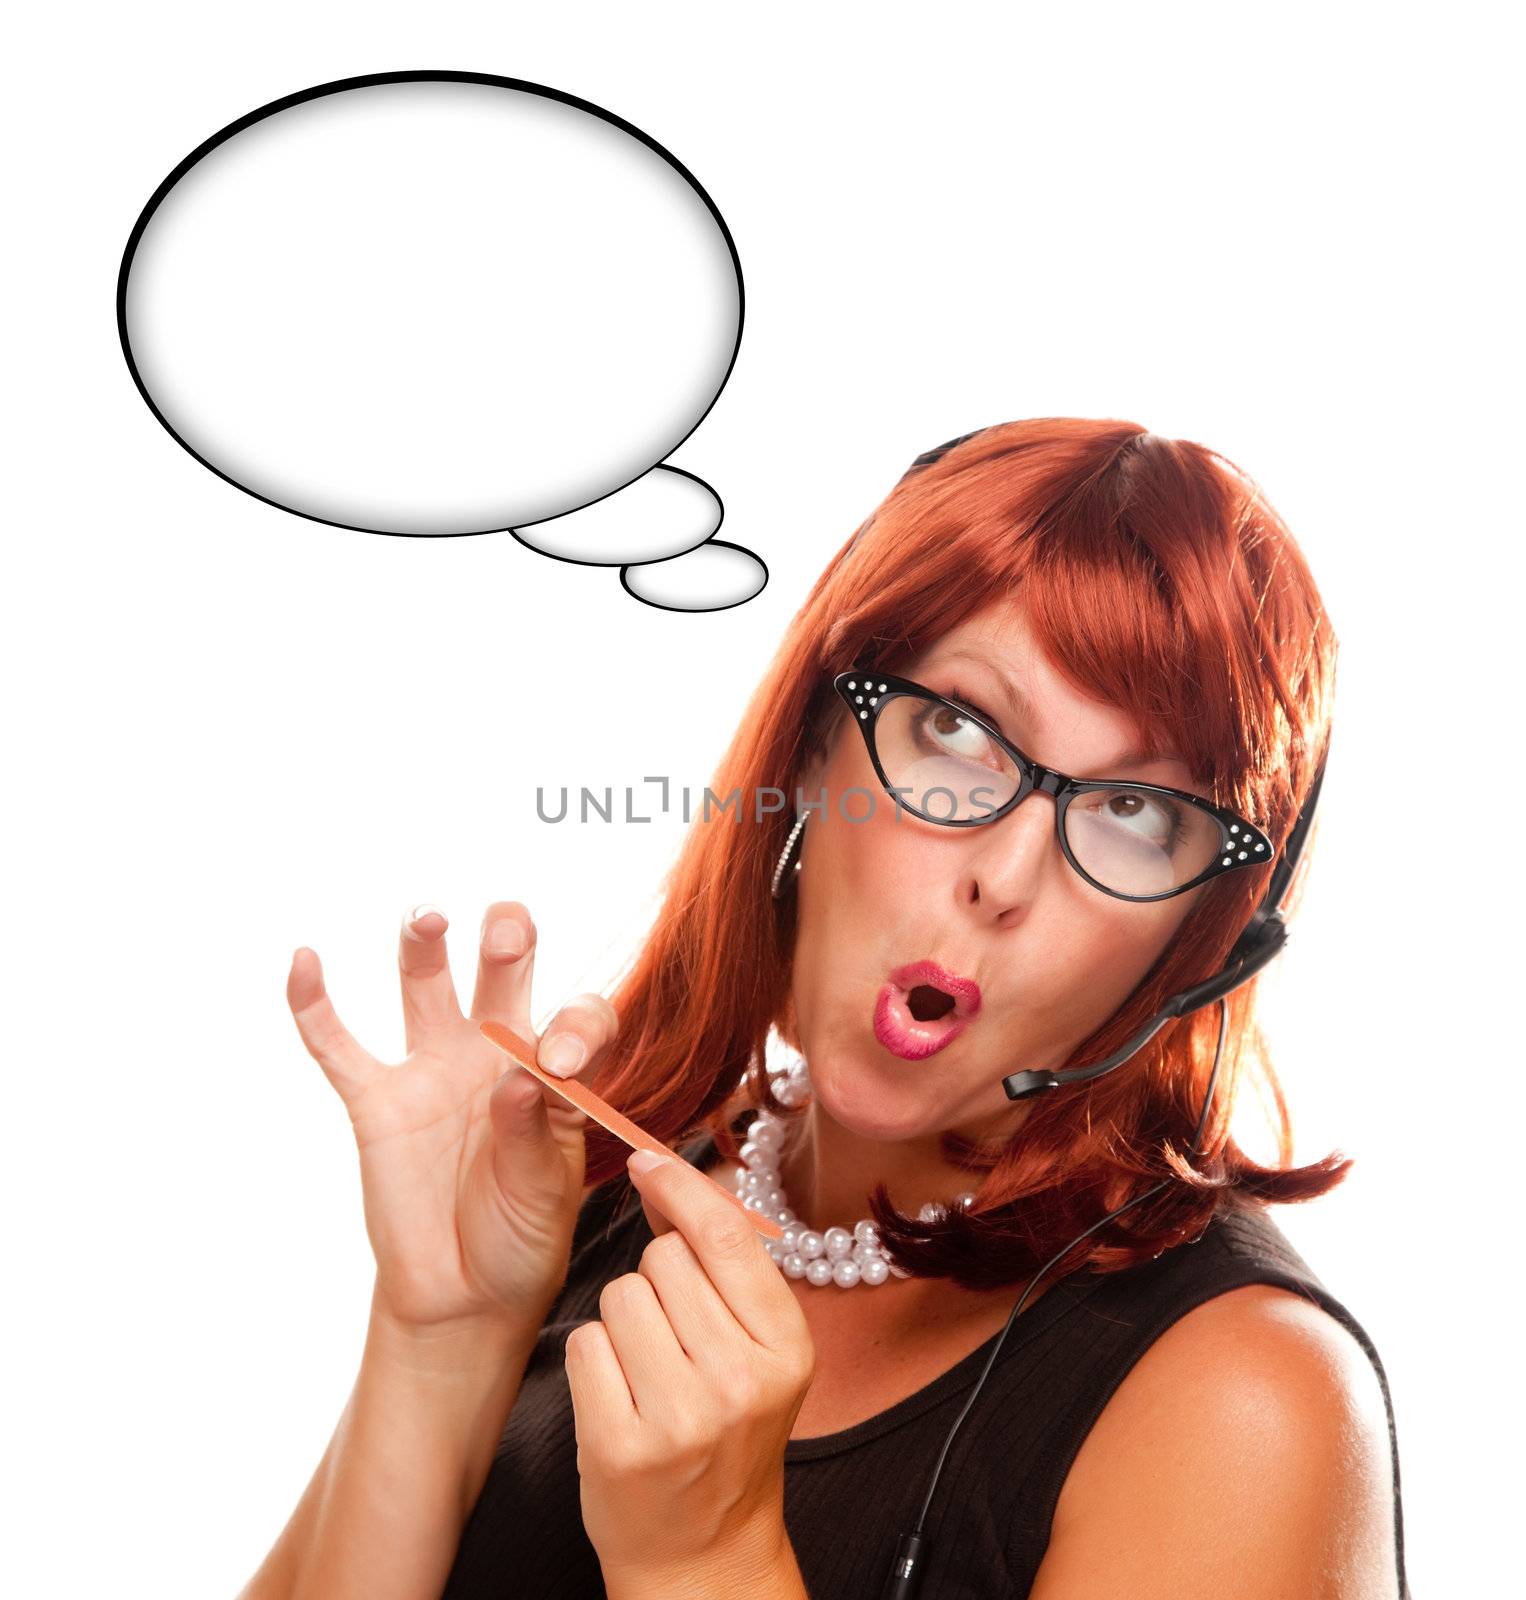 Red Haired Retro ReceptionistRed Haired Retro Receptionist with Blank Thought Bubble Filing Her Nails Isolated on a White Background.